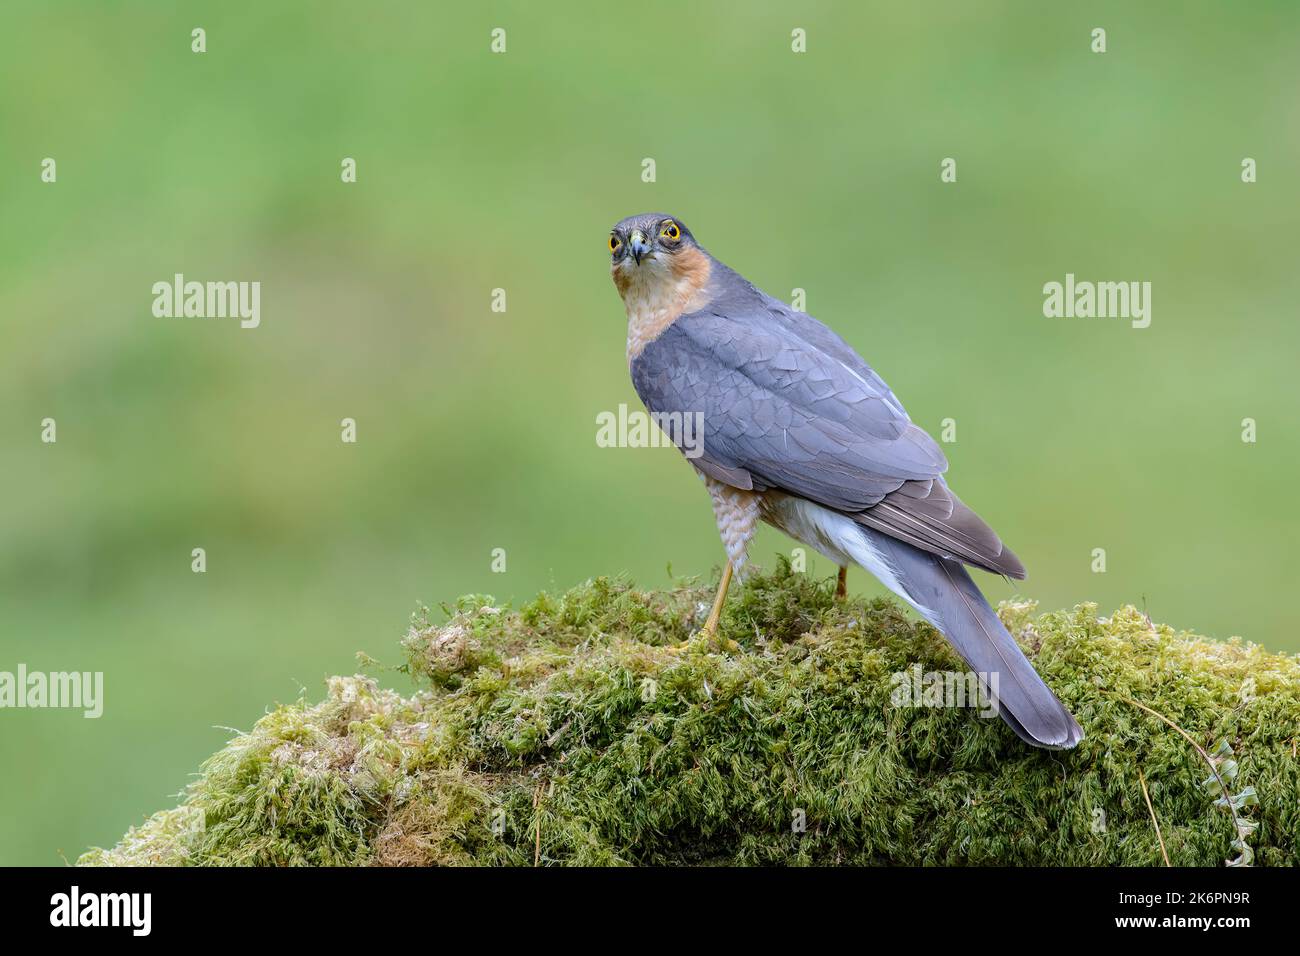 Sparrow hawk, Accipiter Nisus, perched on a lichen covered log, view from behind, head turned back Stock Photo